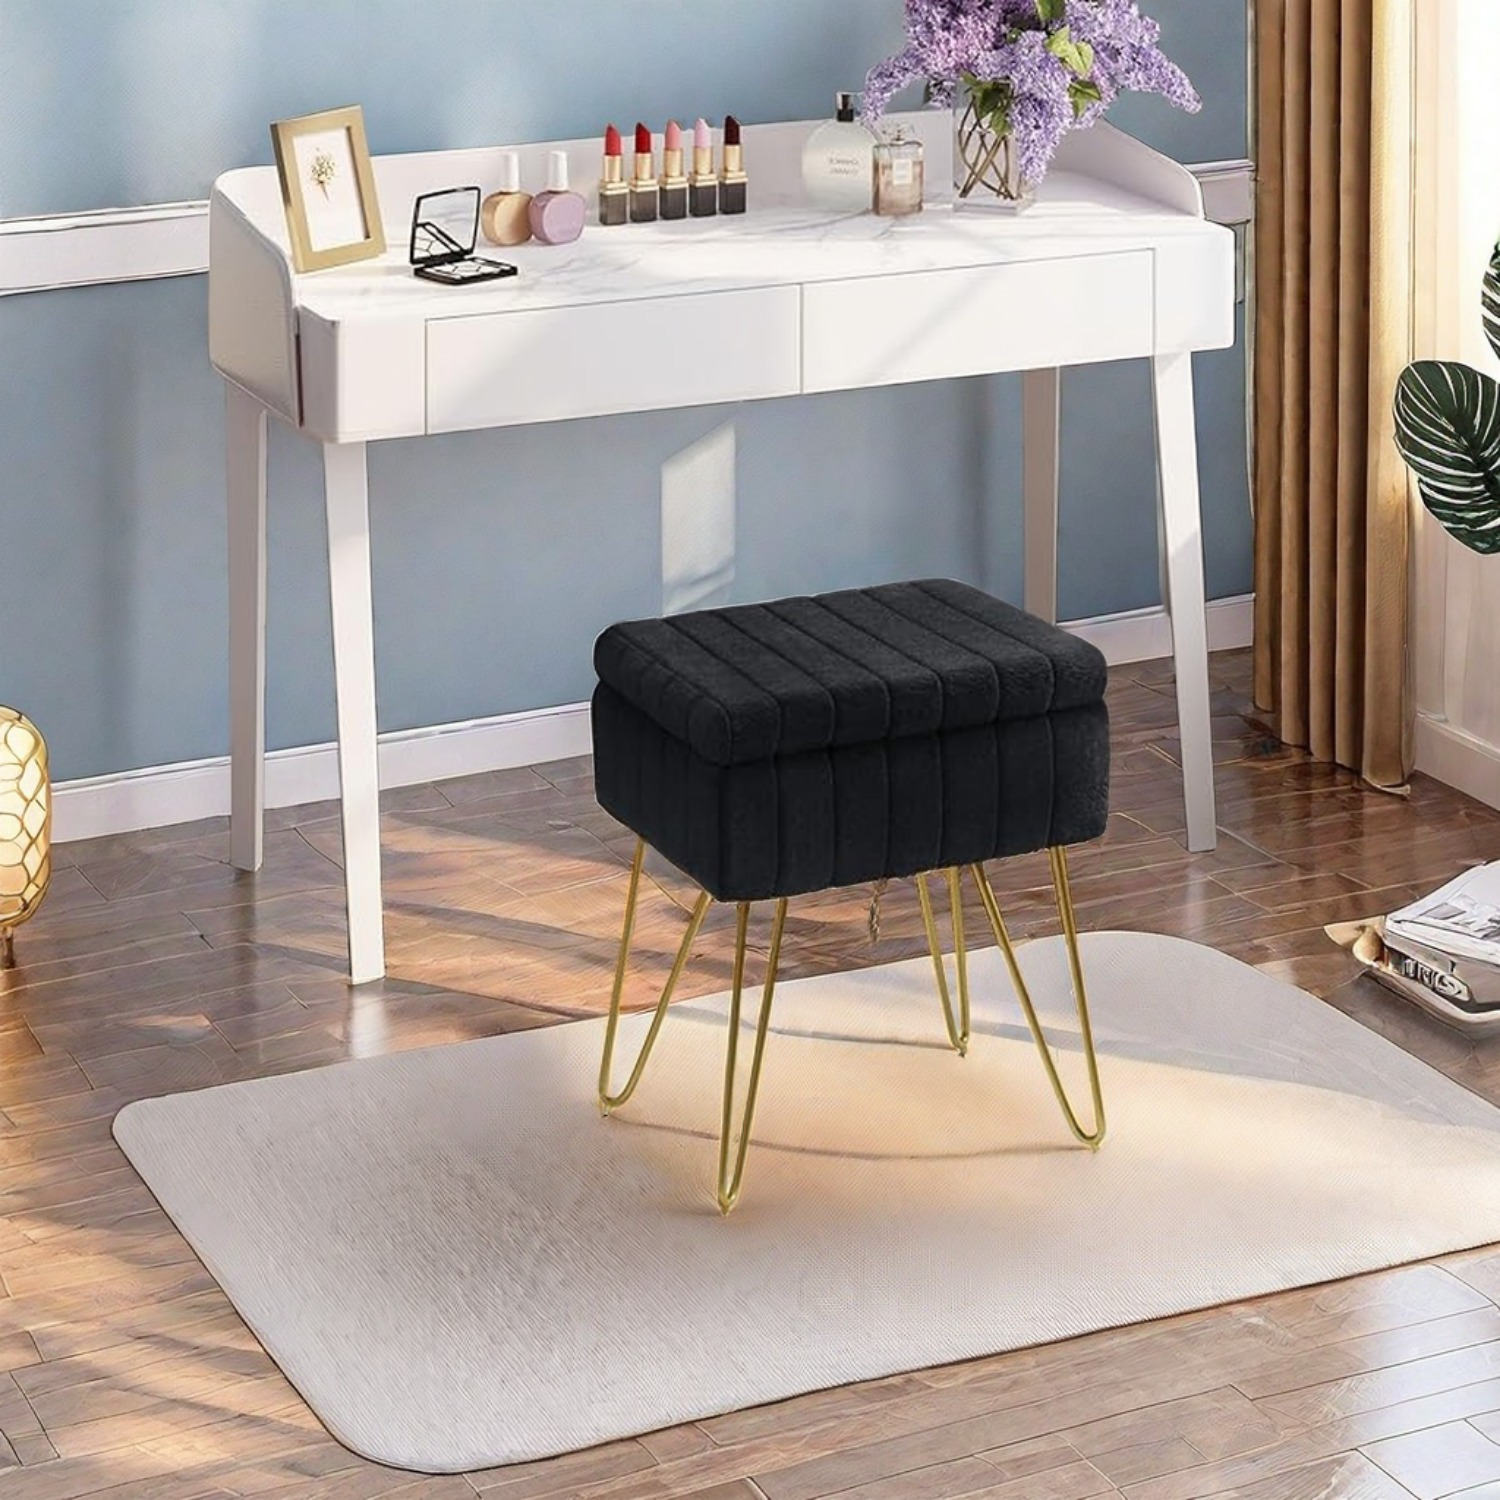 

Greenstell Vanity Stool Chair Faux Fur With Storage, 15.7"l X 11.8"w X 19.4"h Soft Ottoman 4 Metal Legs With Anti-slip Feet, Furry Padded Seat, Modern Multifunctional Chairs For Makeup, Bedroom